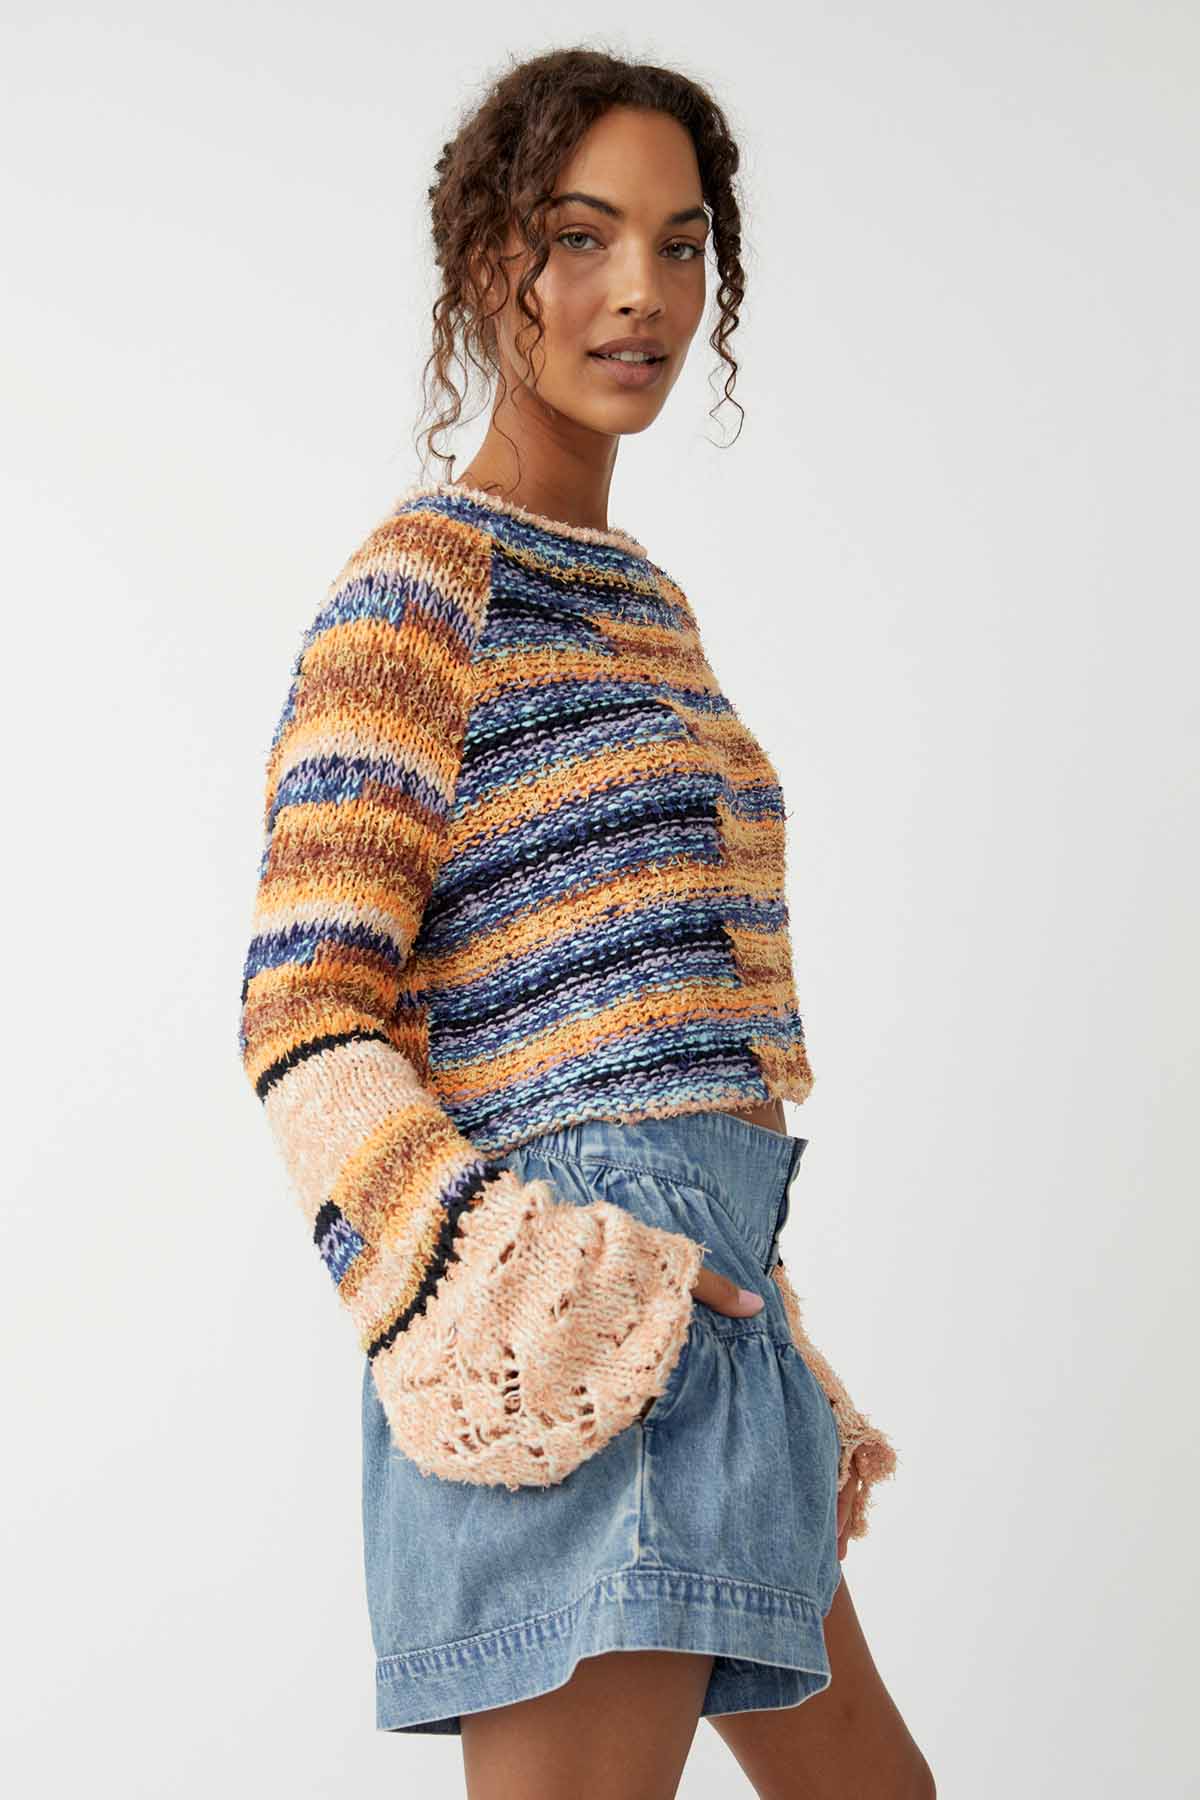 Free People - Butterfly Pullover - Blue Honey Combo - Side